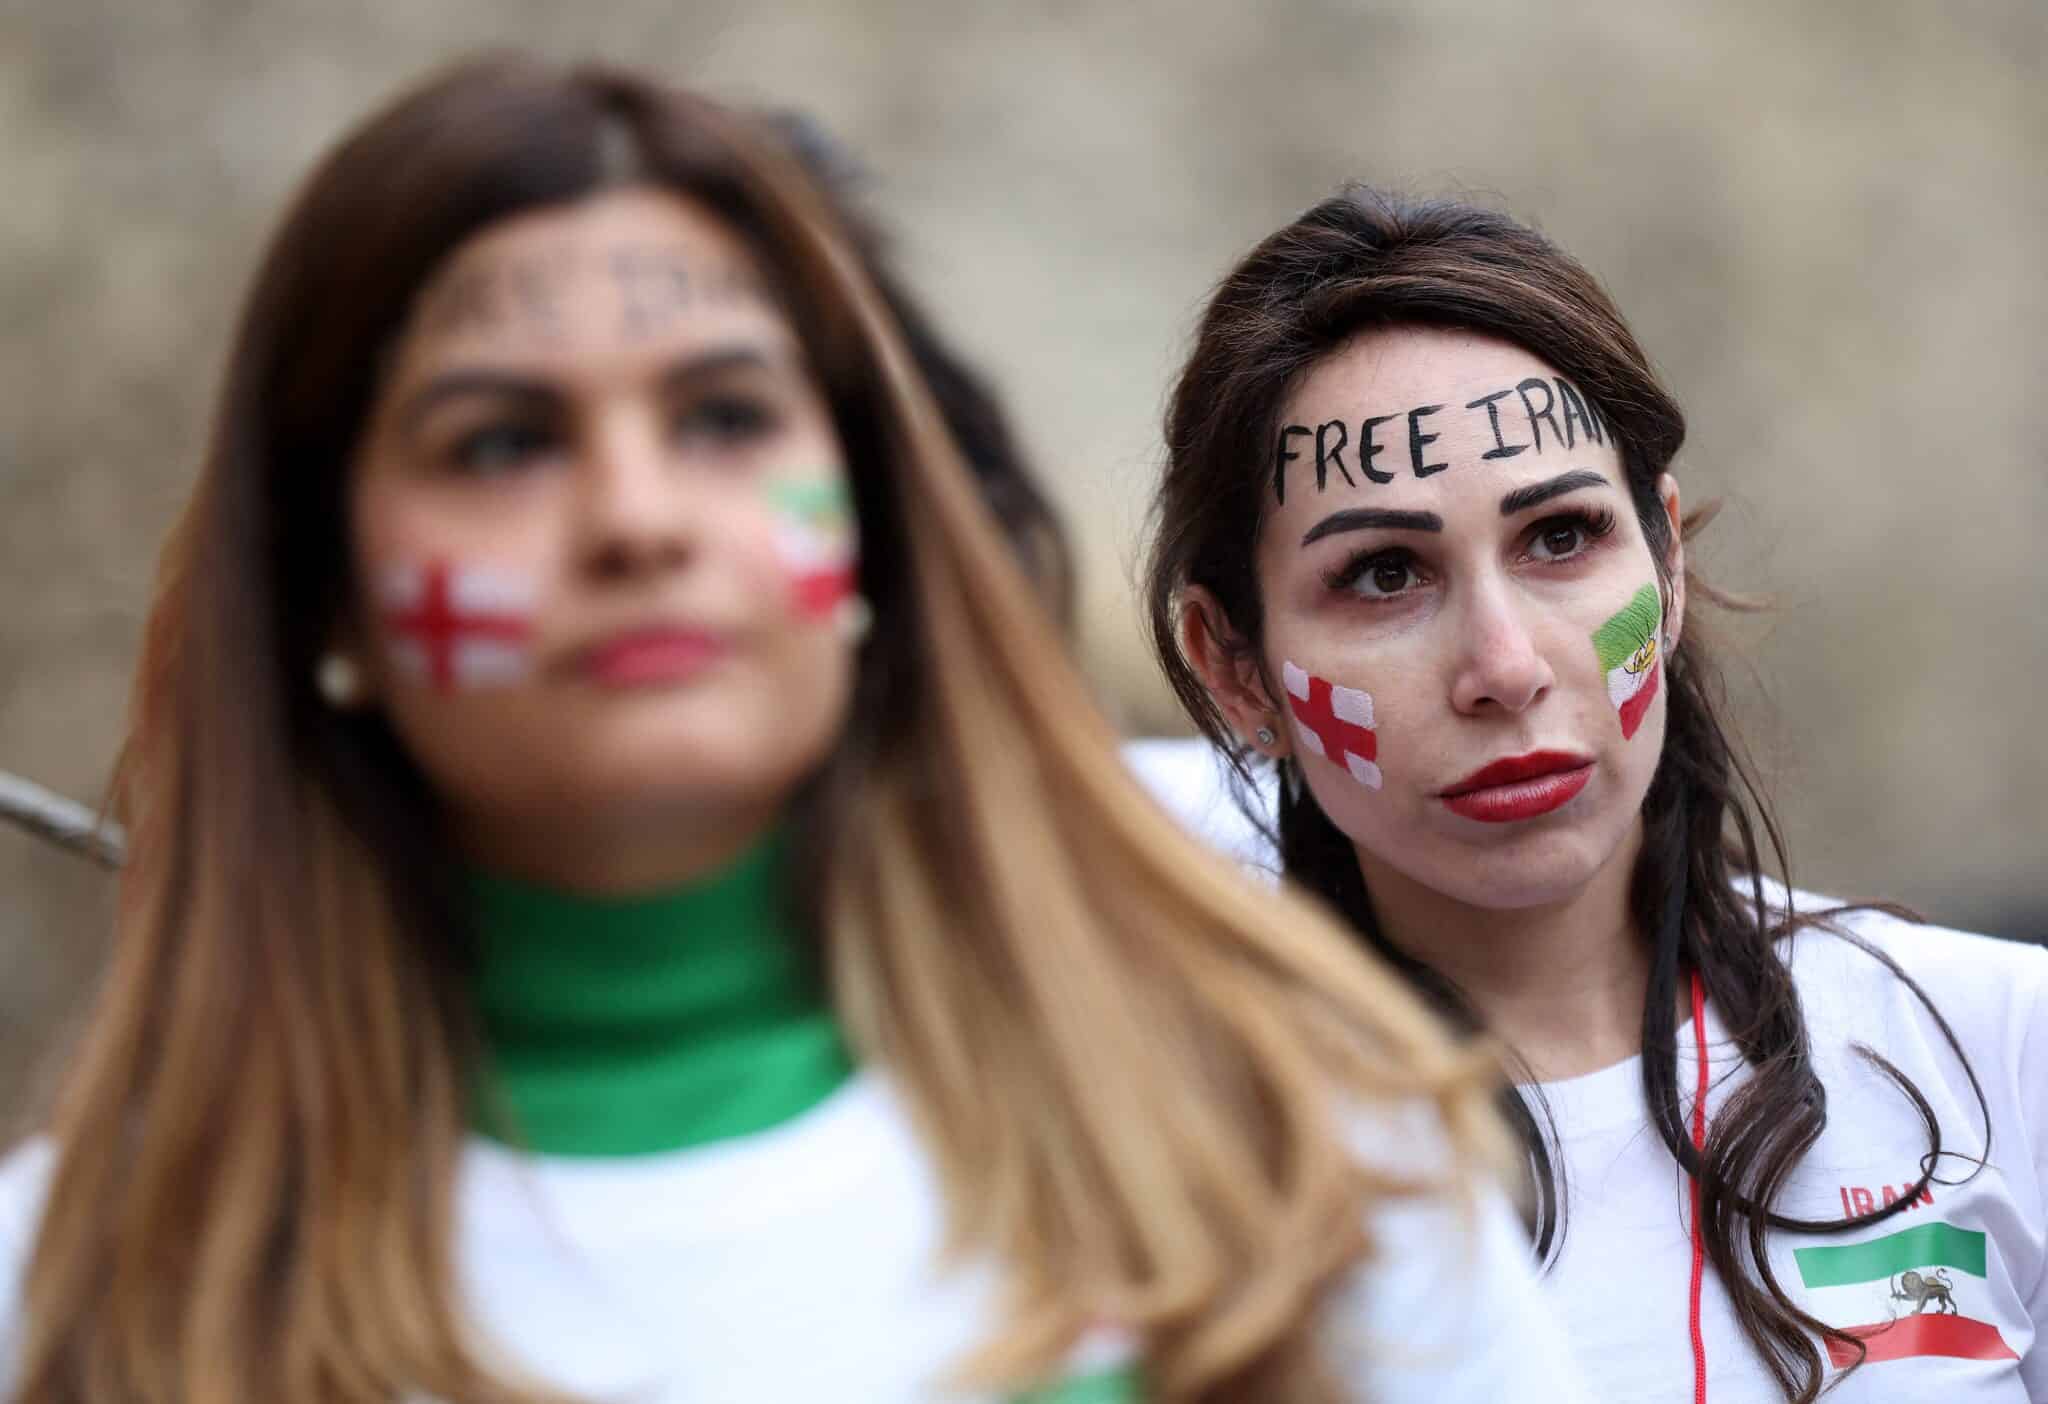 British-Iranian women take part in a demonstration opposite the Houses of Parliament in central London on November 19, 2022, ahead of Iran's fixture against England in the 2022 FIFA World Cup. - The 22 women protestors are calling for people in Iran and around the world to protest at the start of every world cup match played by Iran, by blowing a football whistle for one minute at the start of each match. (Photo by ISABEL INFANTES / AFP) (Photo by ISABEL INFANTES/AFP via Getty Images)